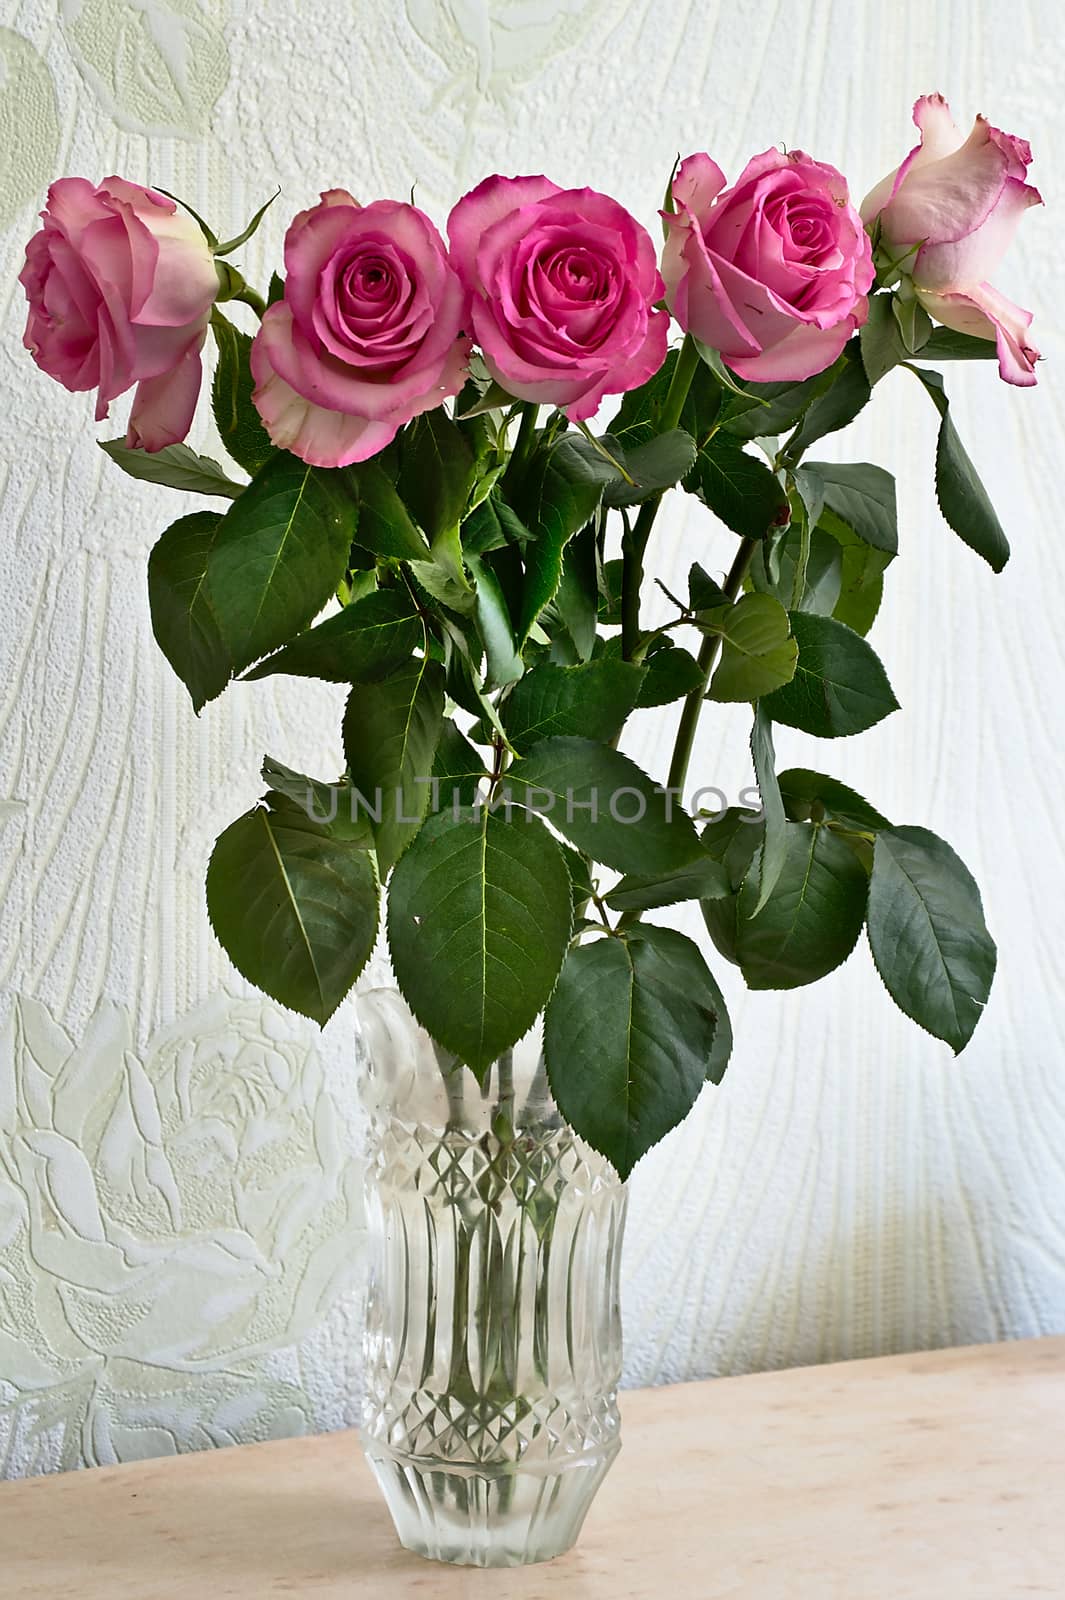 A bouquet of pink roses stands in a vase on the table decorating the room.